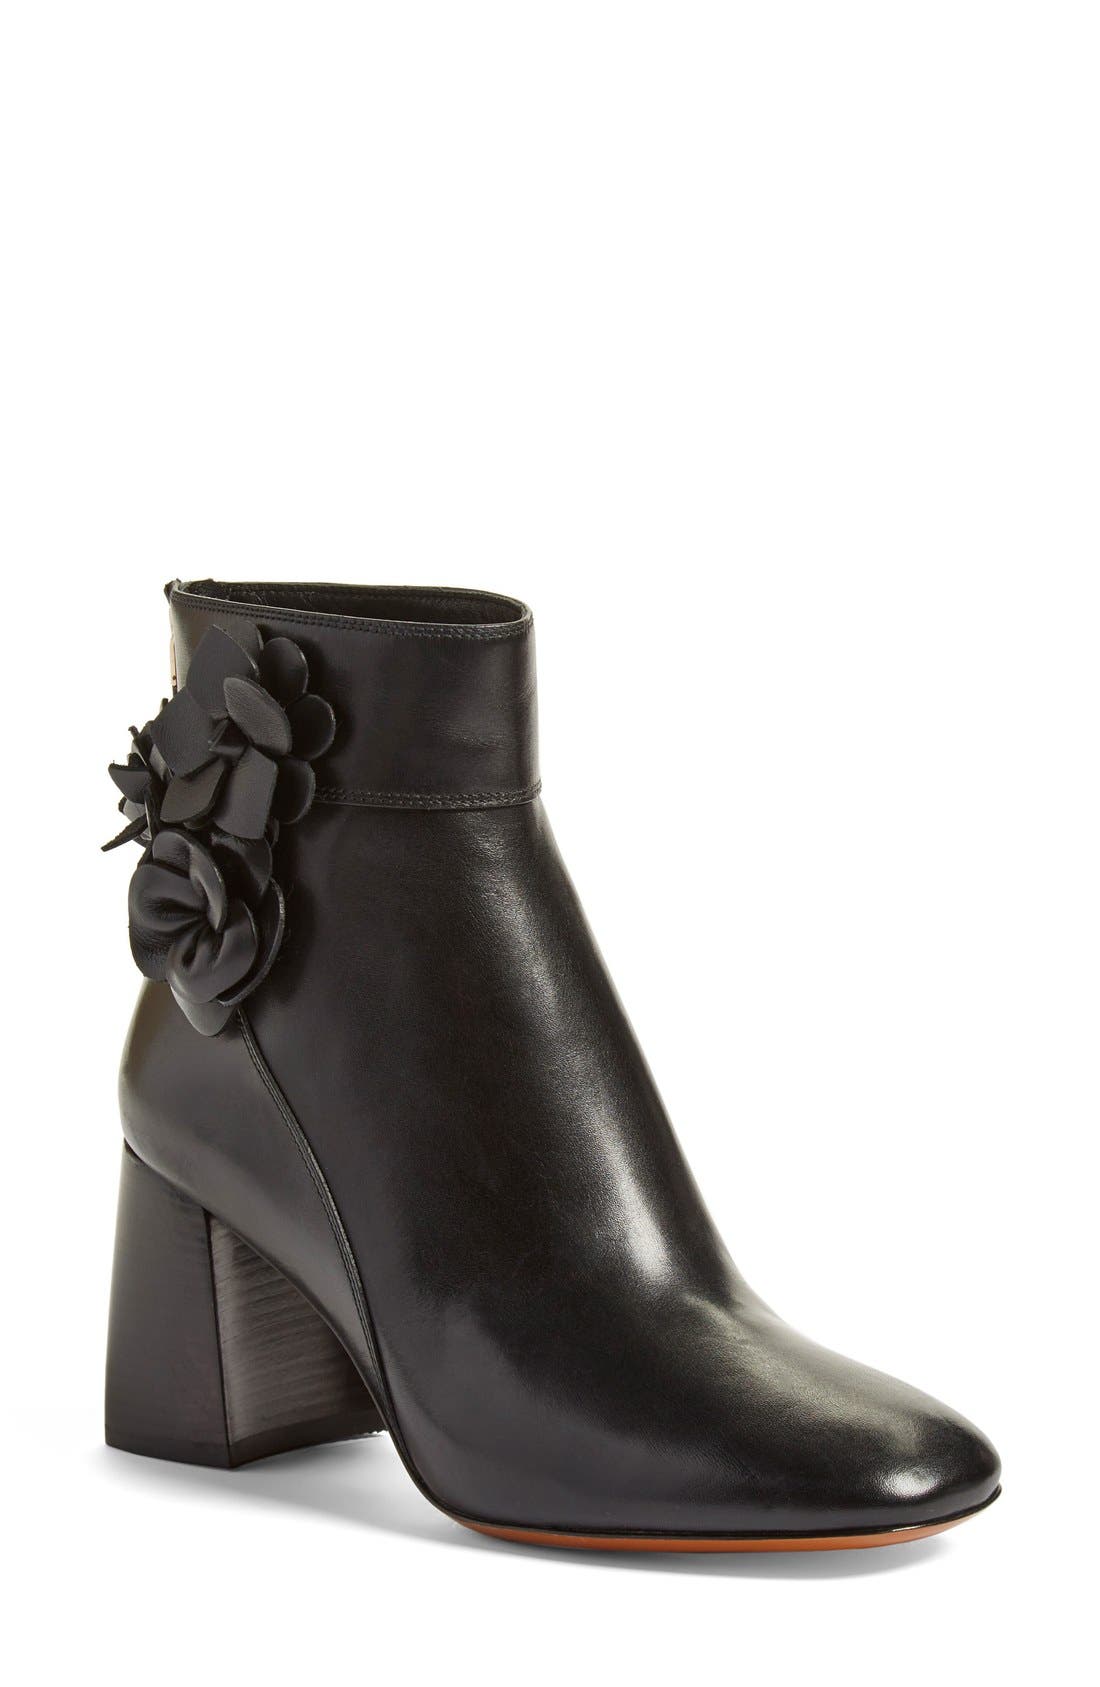 tory burch blossom boots